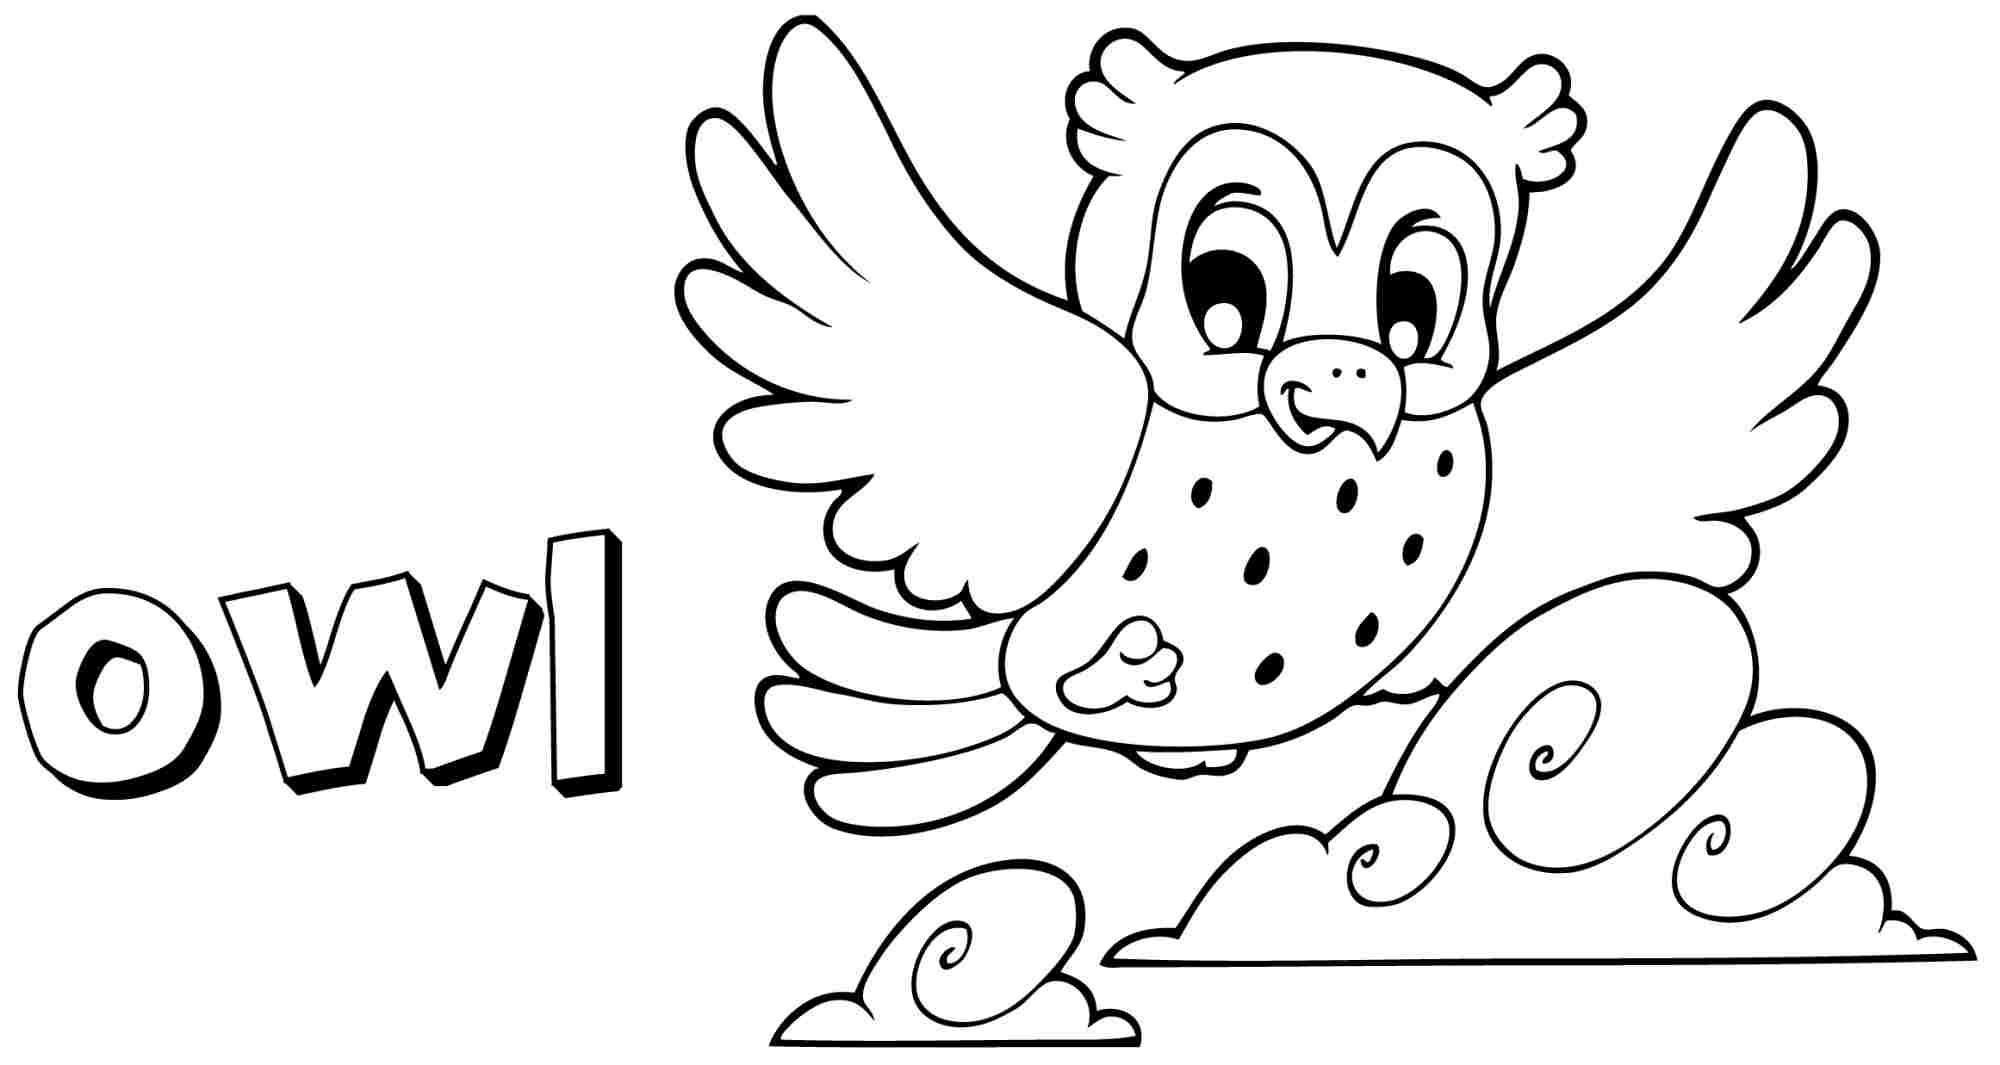 Cute Baby Owl Coloring Pages
 Cute Baby Owl Drawing at GetDrawings